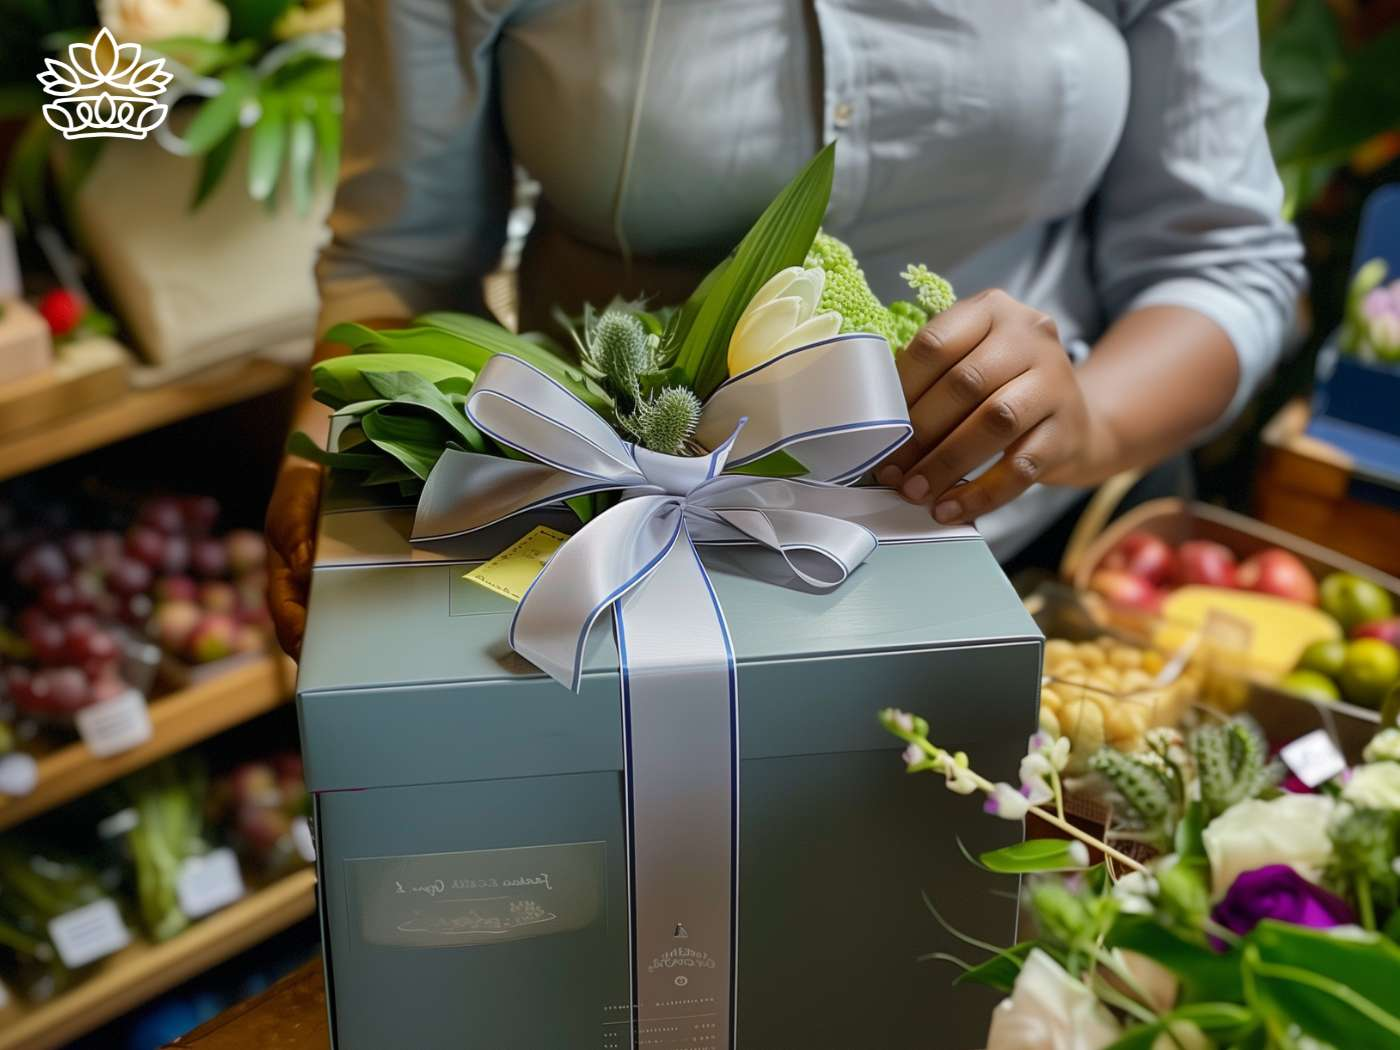 Artistic presentation of a luxury gift box with a lush arrangement of artificial greenery and flowers, secured with an elegant silver ribbon, showcasing the bespoke floral offerings from Fabulous Flowers and Gifts.